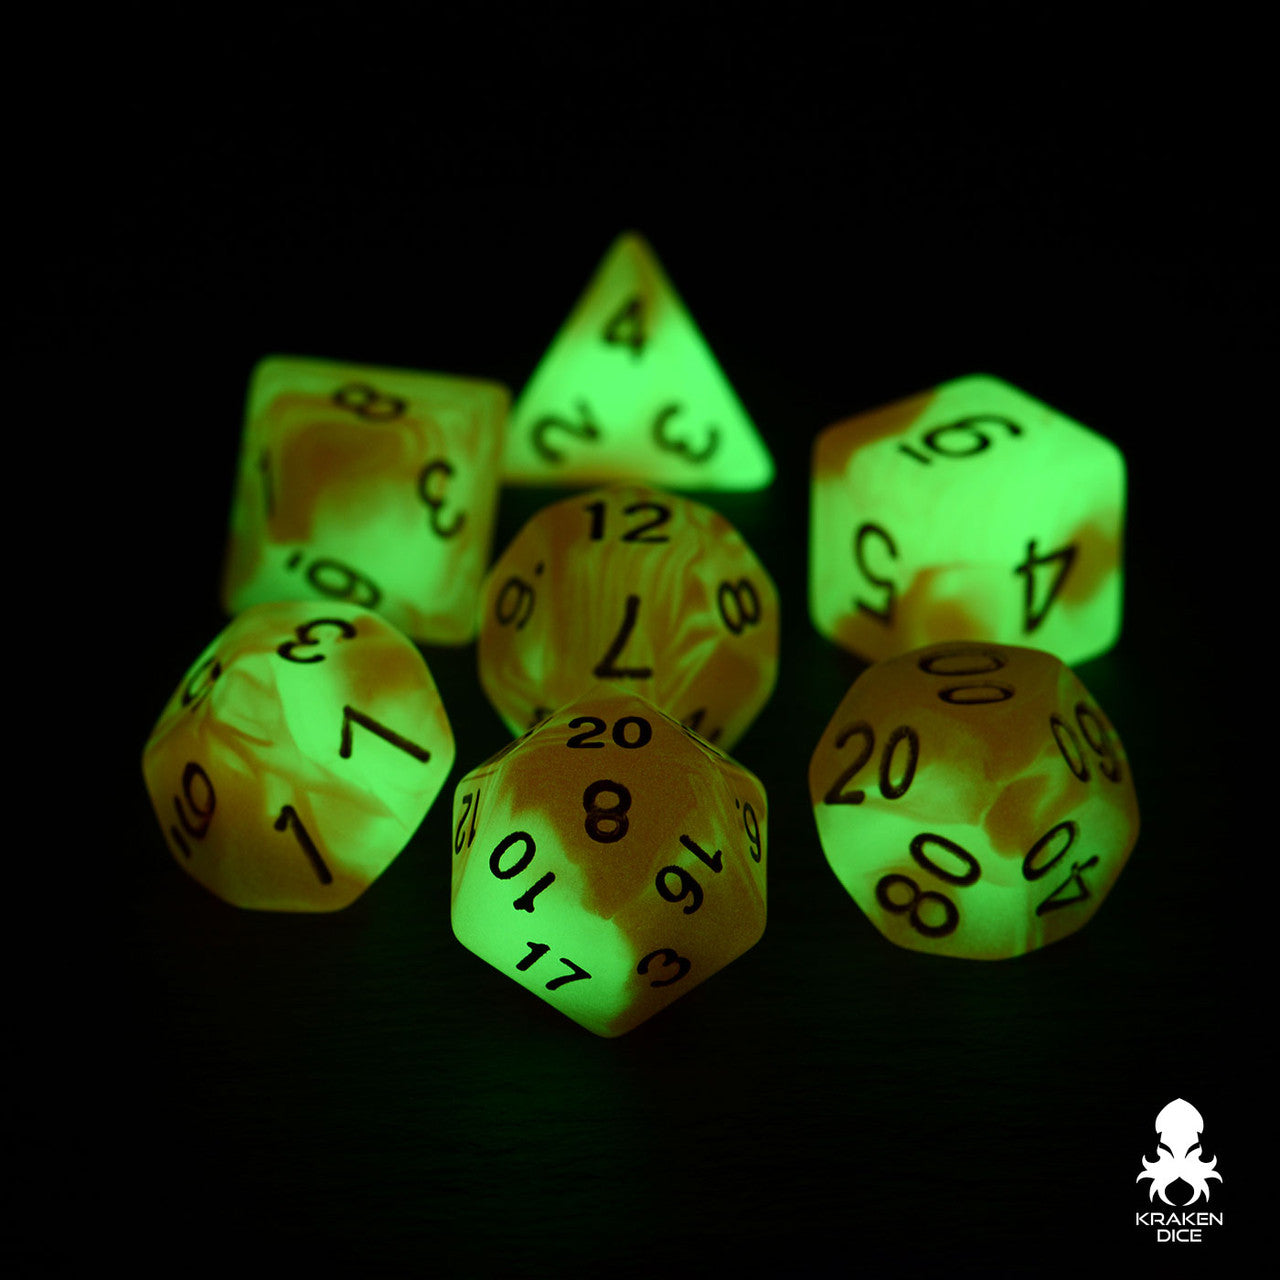 Red  & White (Green Glow) Glow in the Dark Dice Set